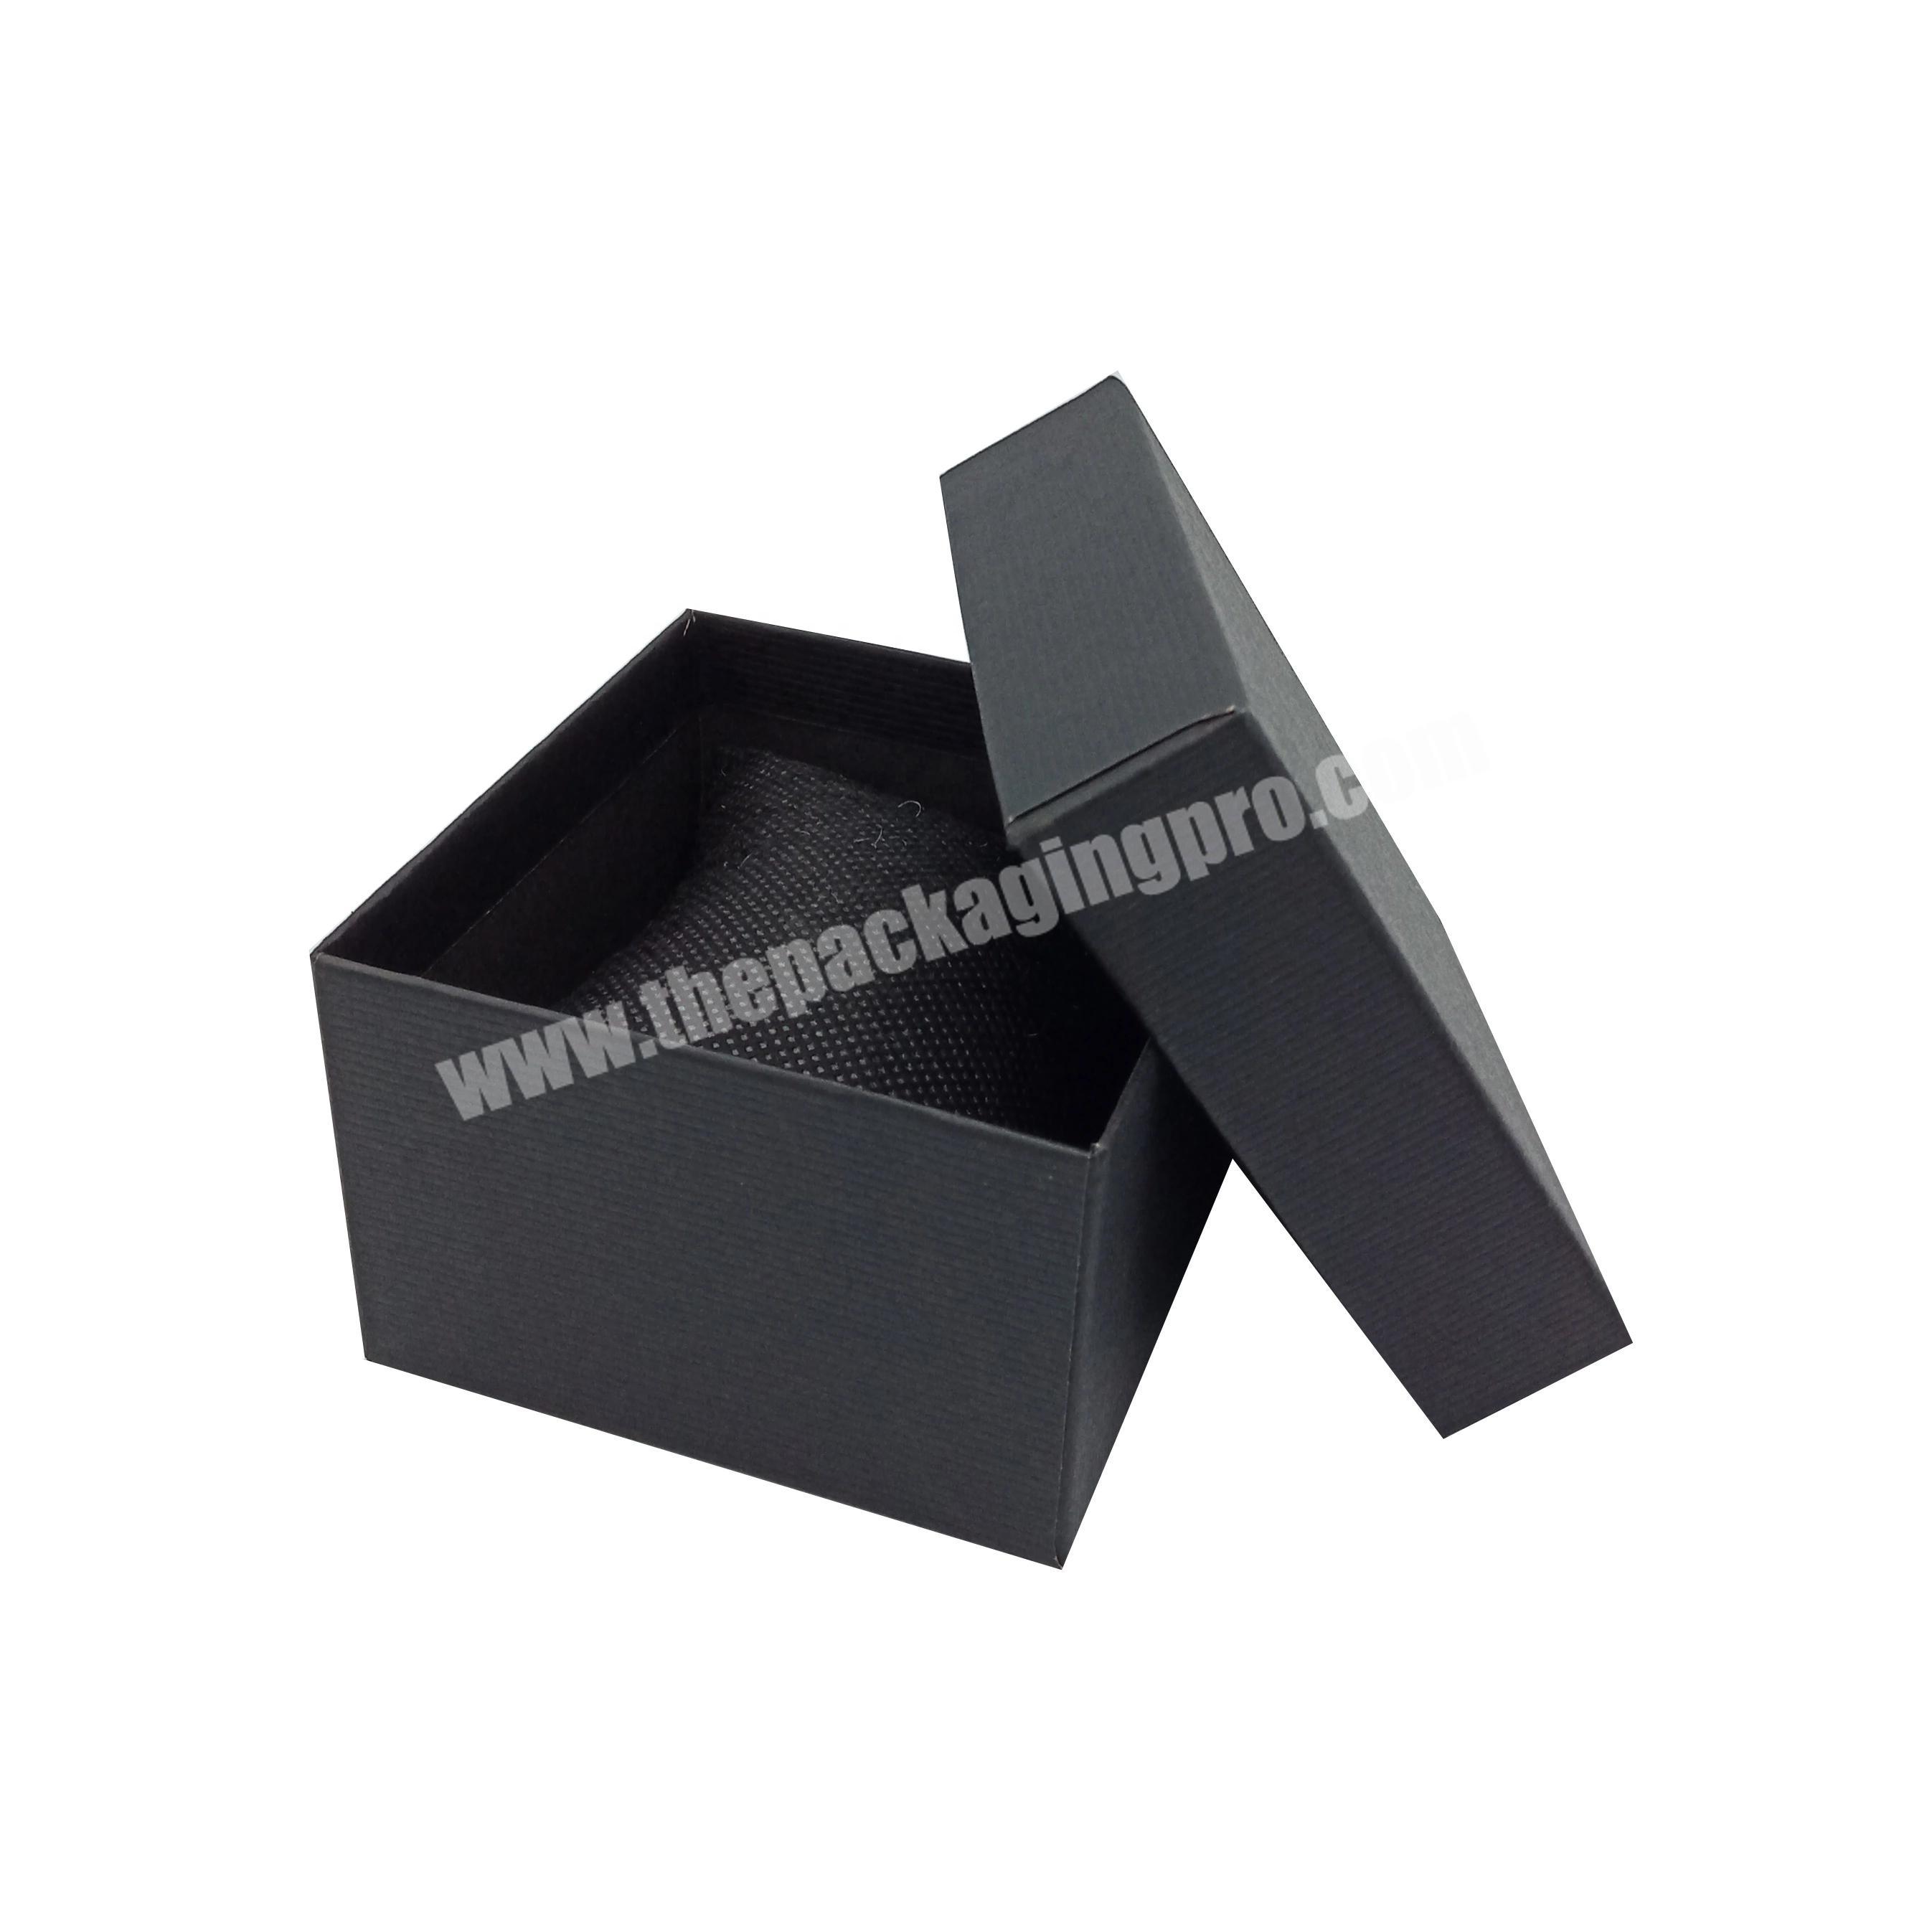 WHOLESALE STORAGE linen embossed cheap black paper cube watch gift box with cotton pillow